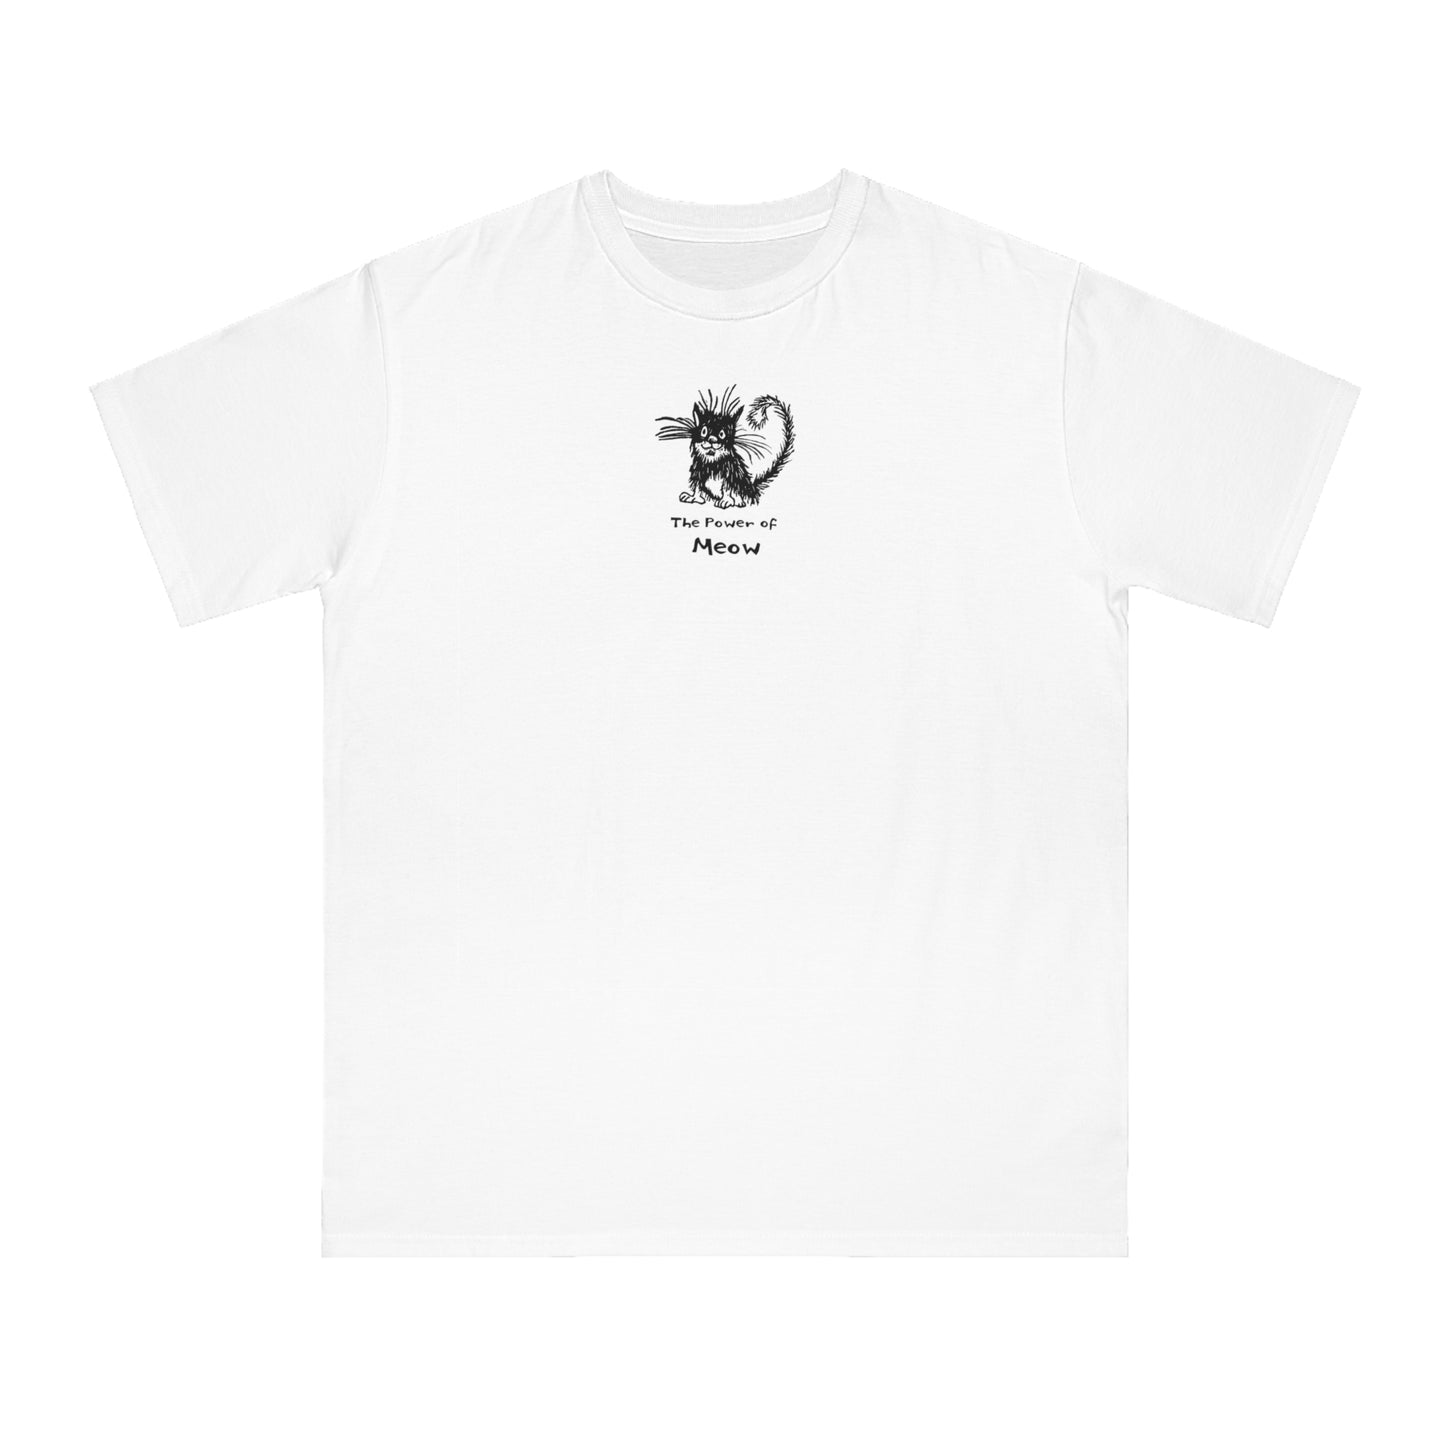 Black and white cat sitting on white color unisex men's t-shirt.  Text under reads The Power of Meow